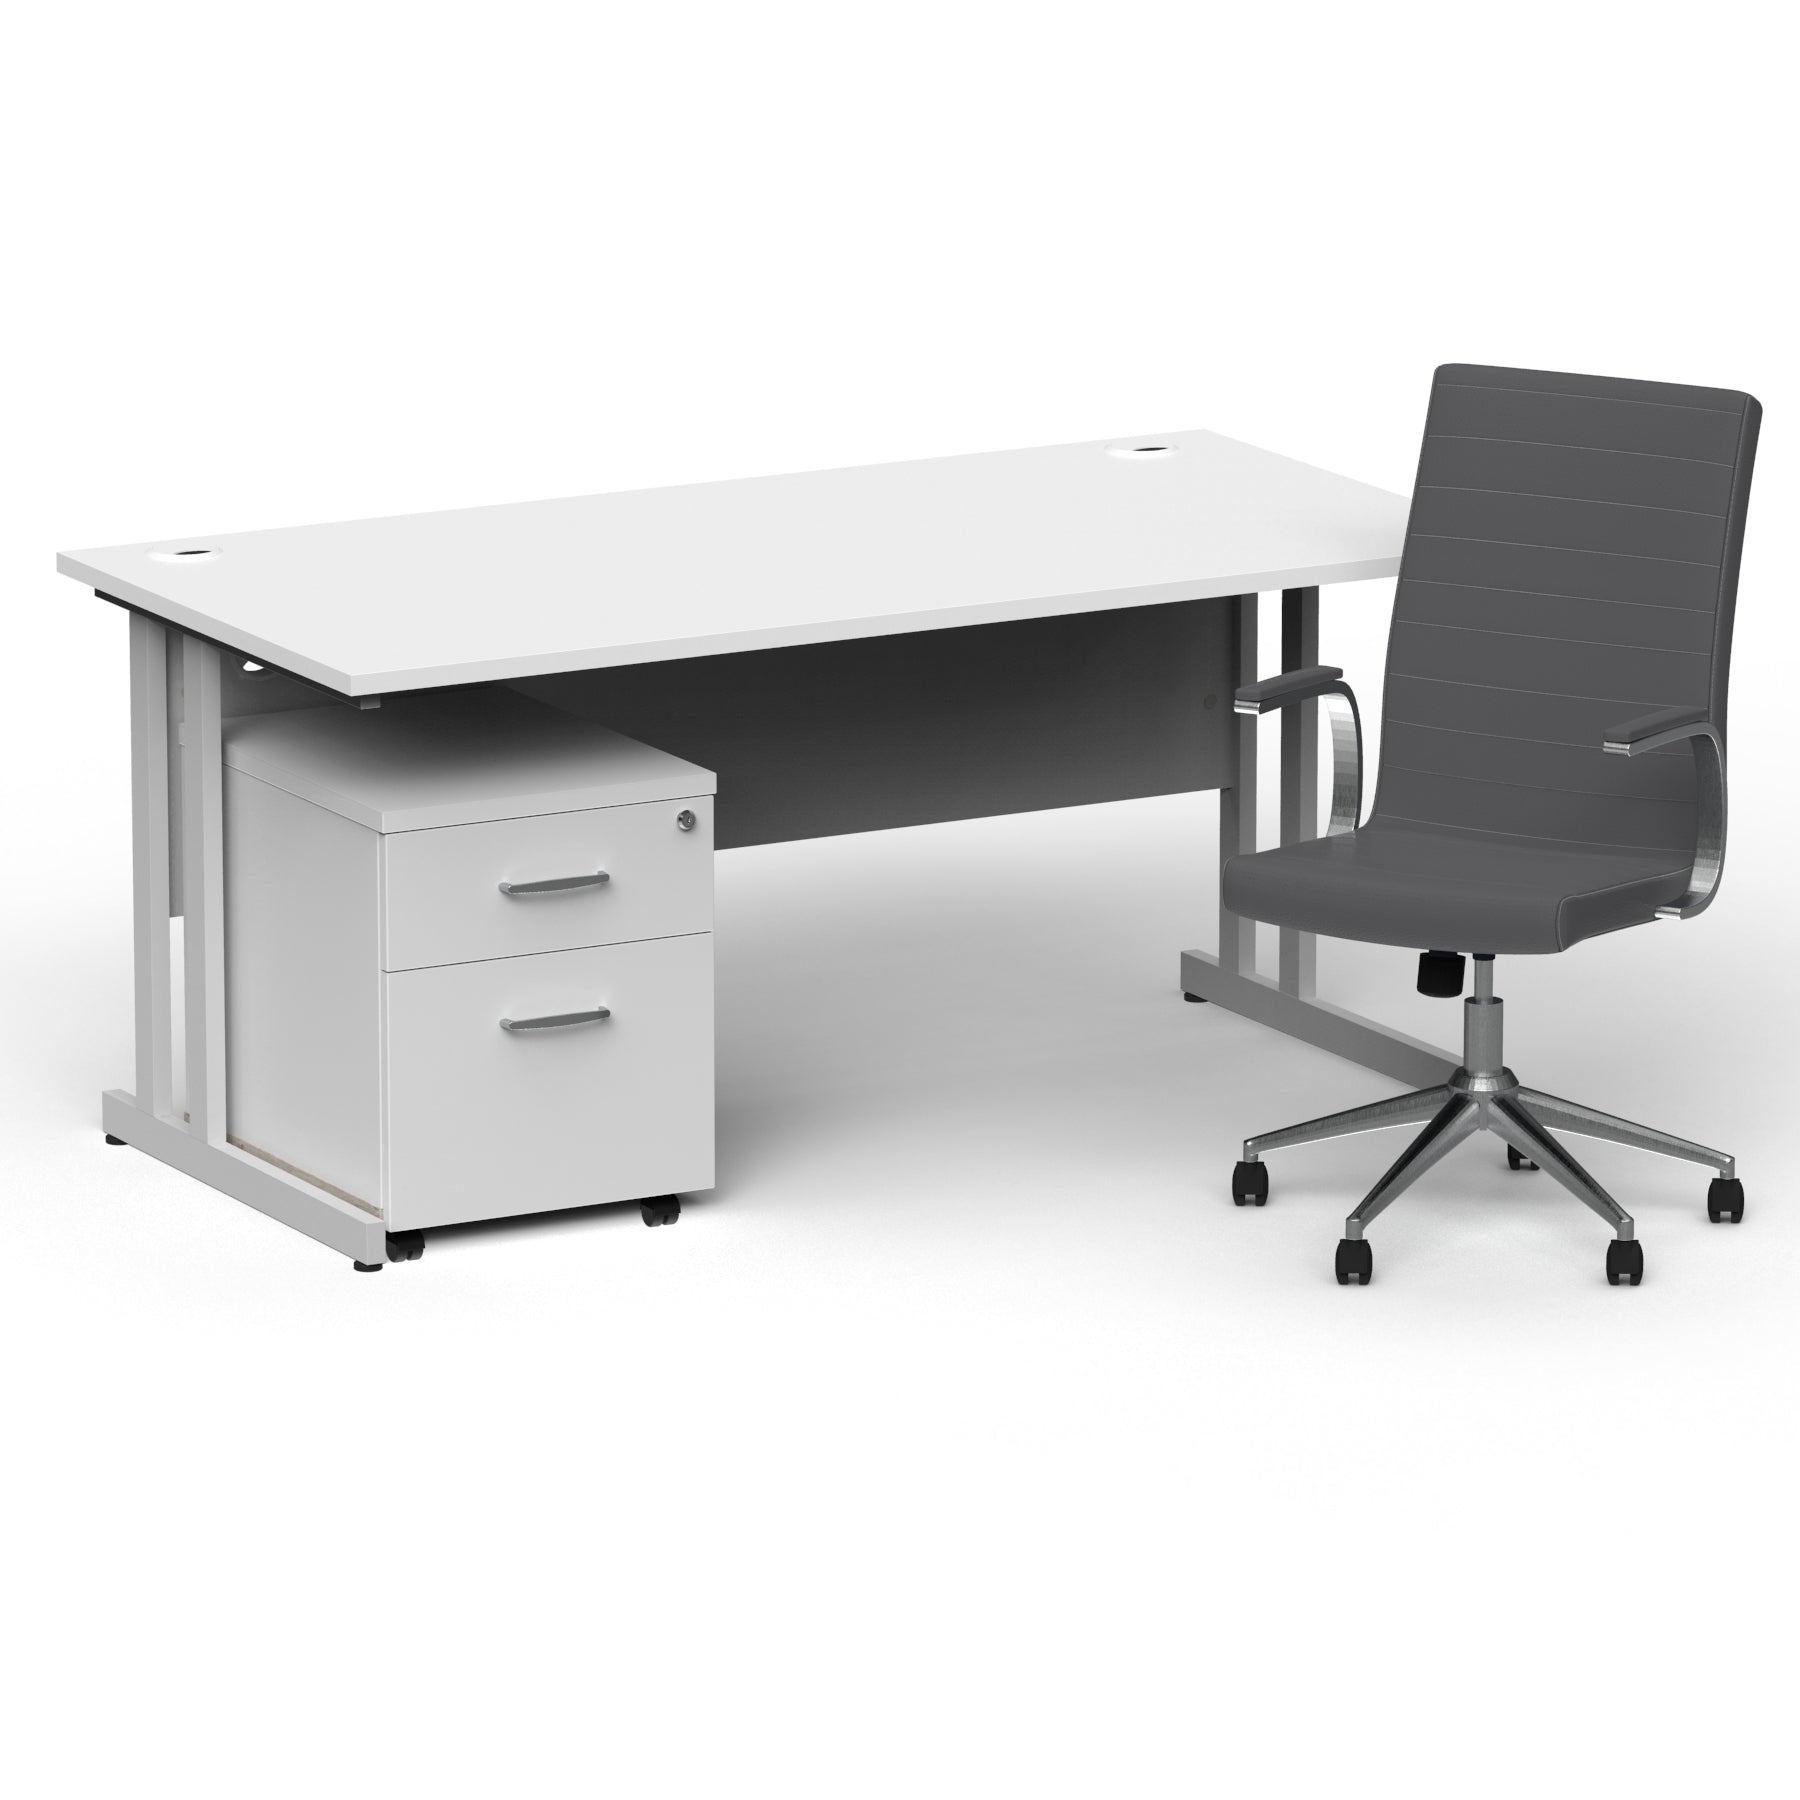 Impulse 1600mm Cantilever Straight Desk With Mobile Pedestal and Ezra Grey Executive Chair